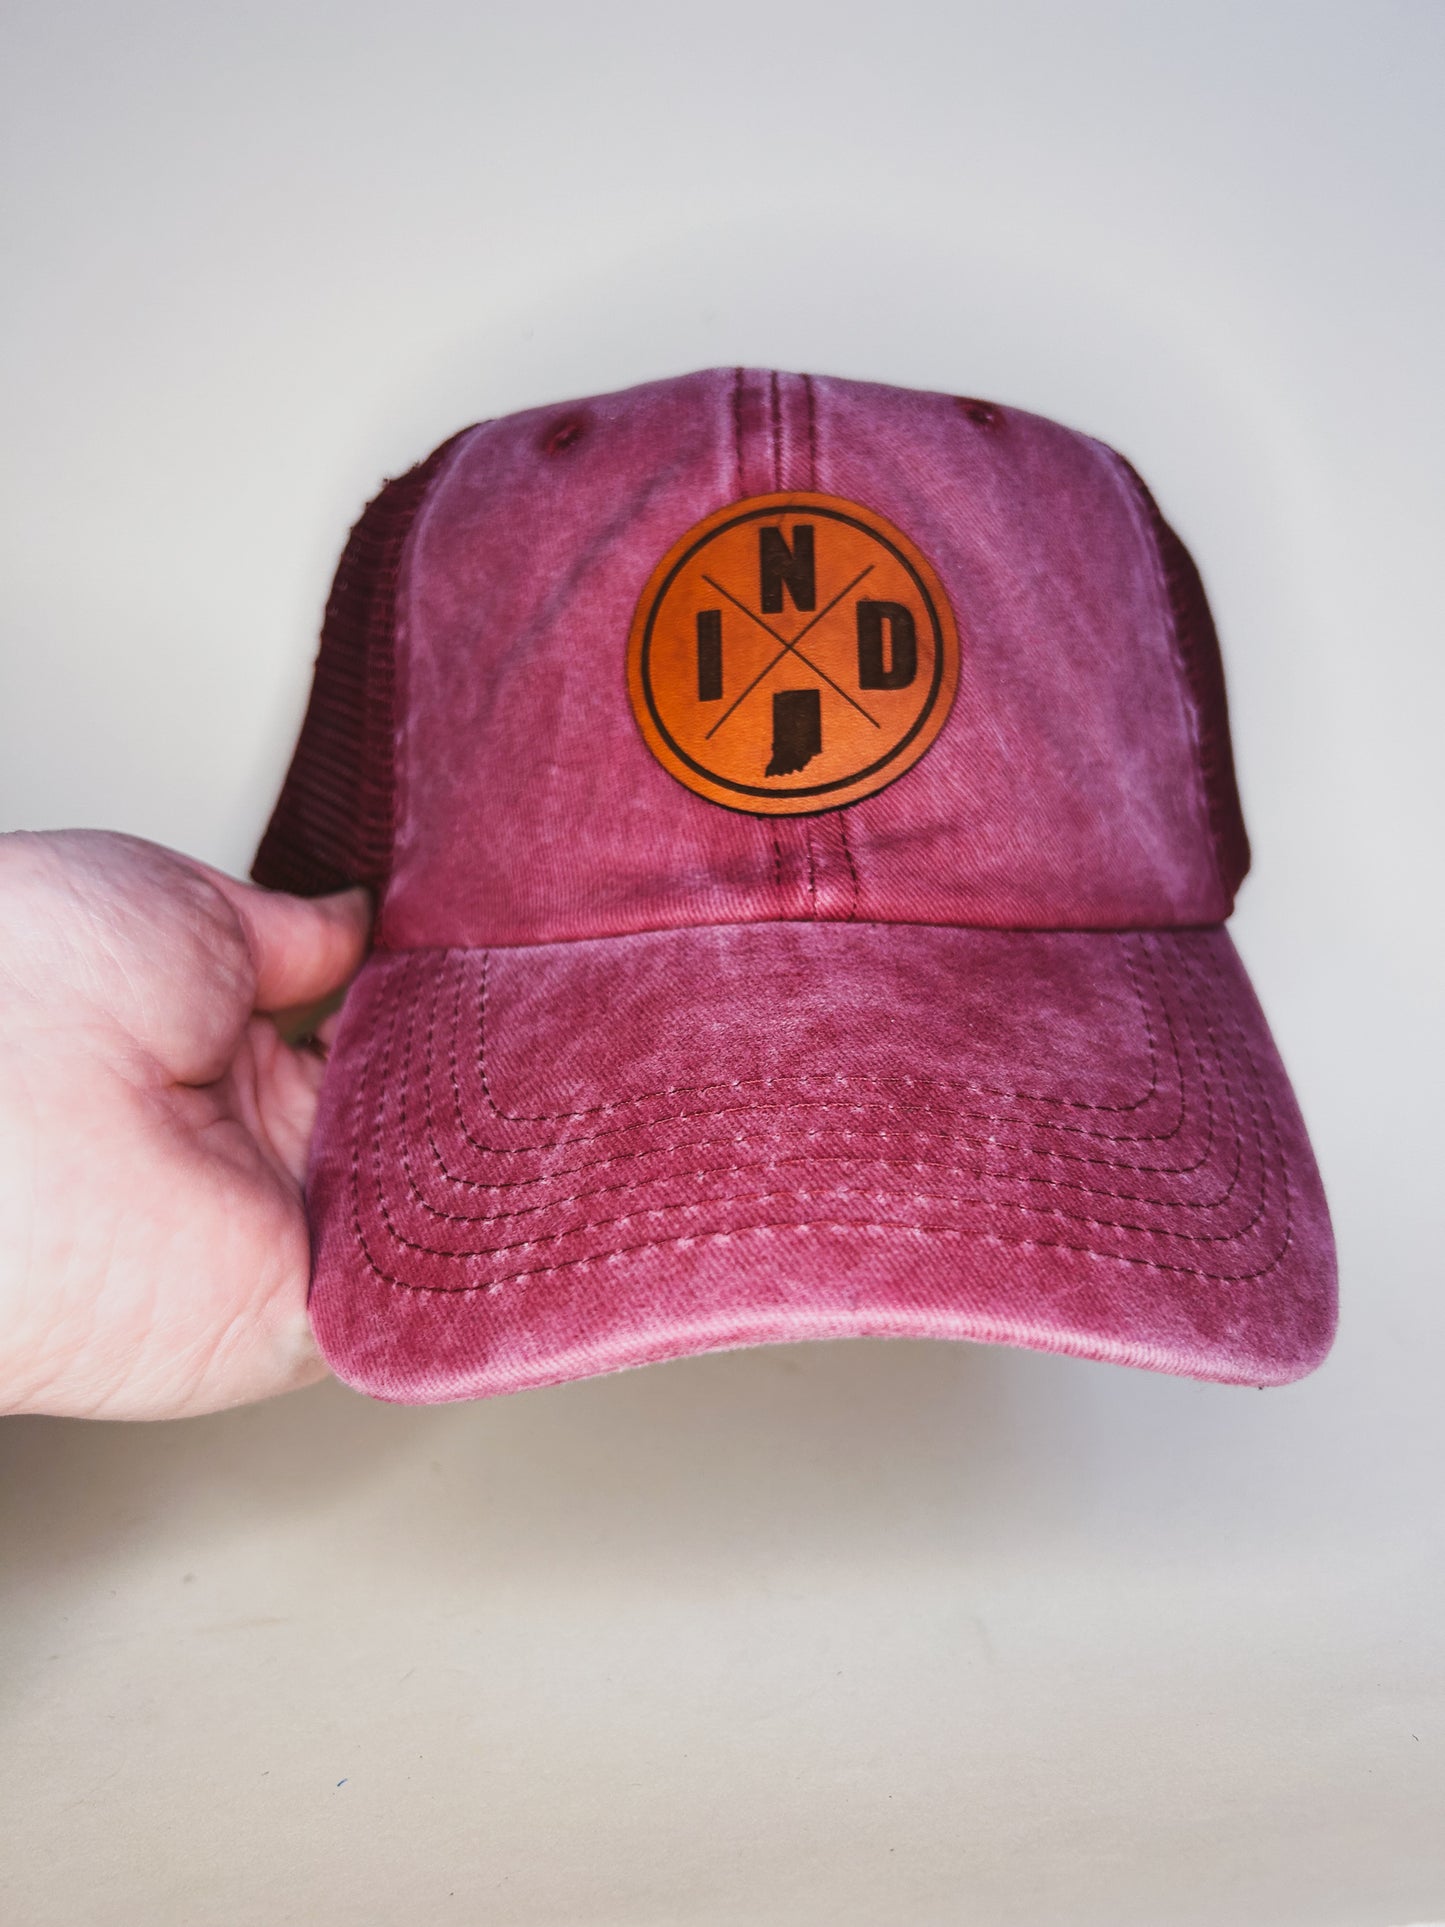 Indiana IND Circle Patch on Maroon Baseball Hat